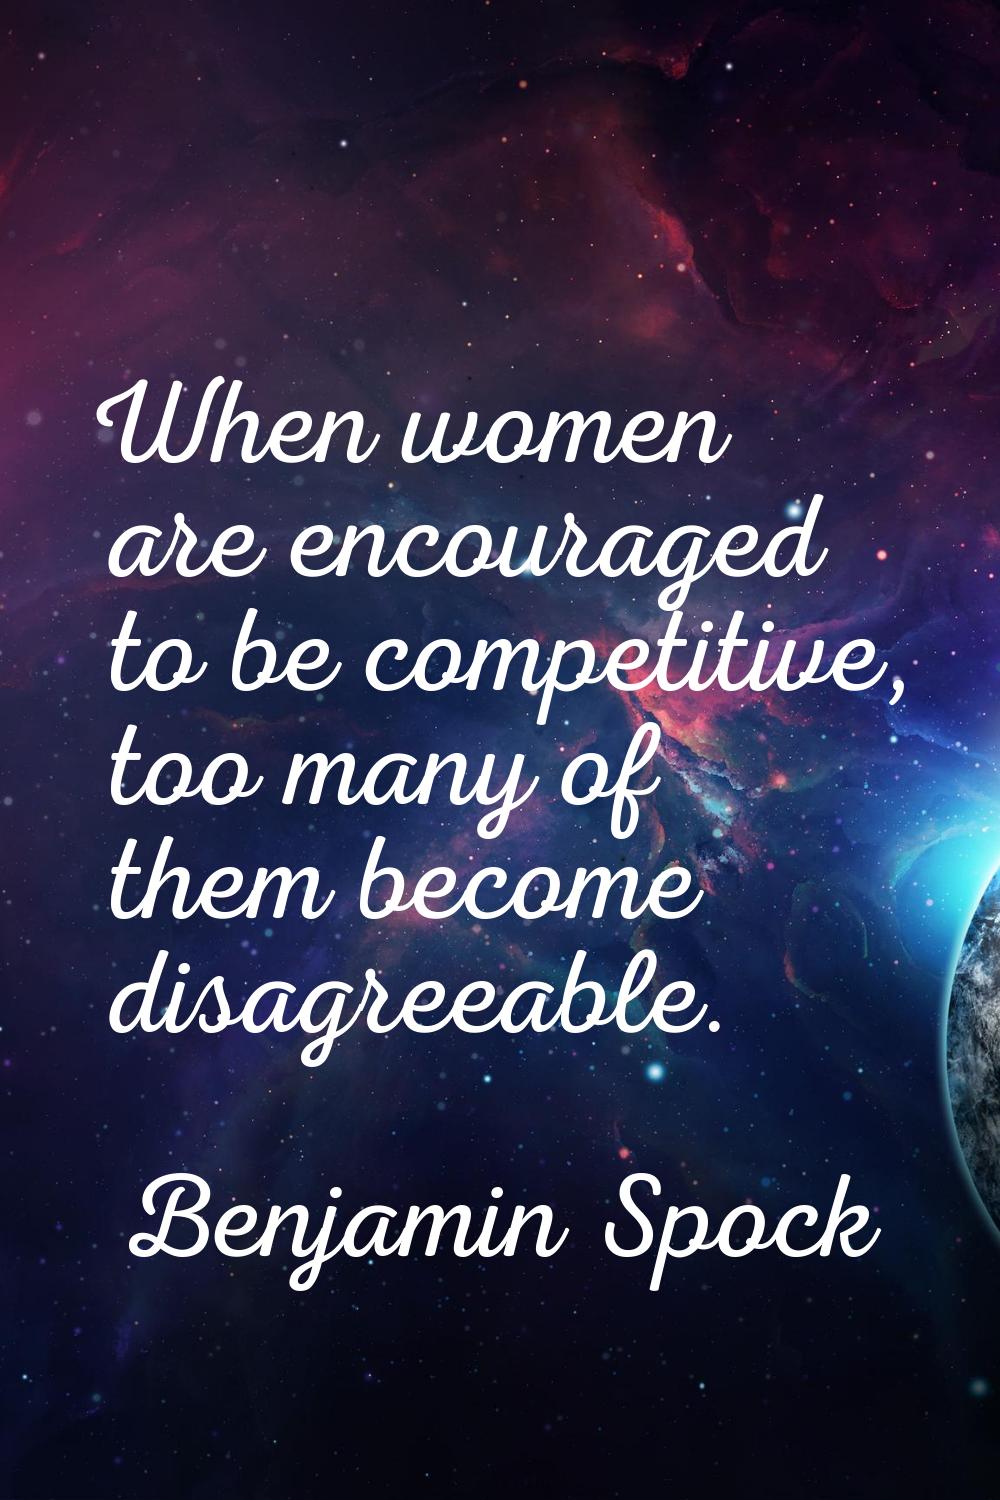 When women are encouraged to be competitive, too many of them become disagreeable.